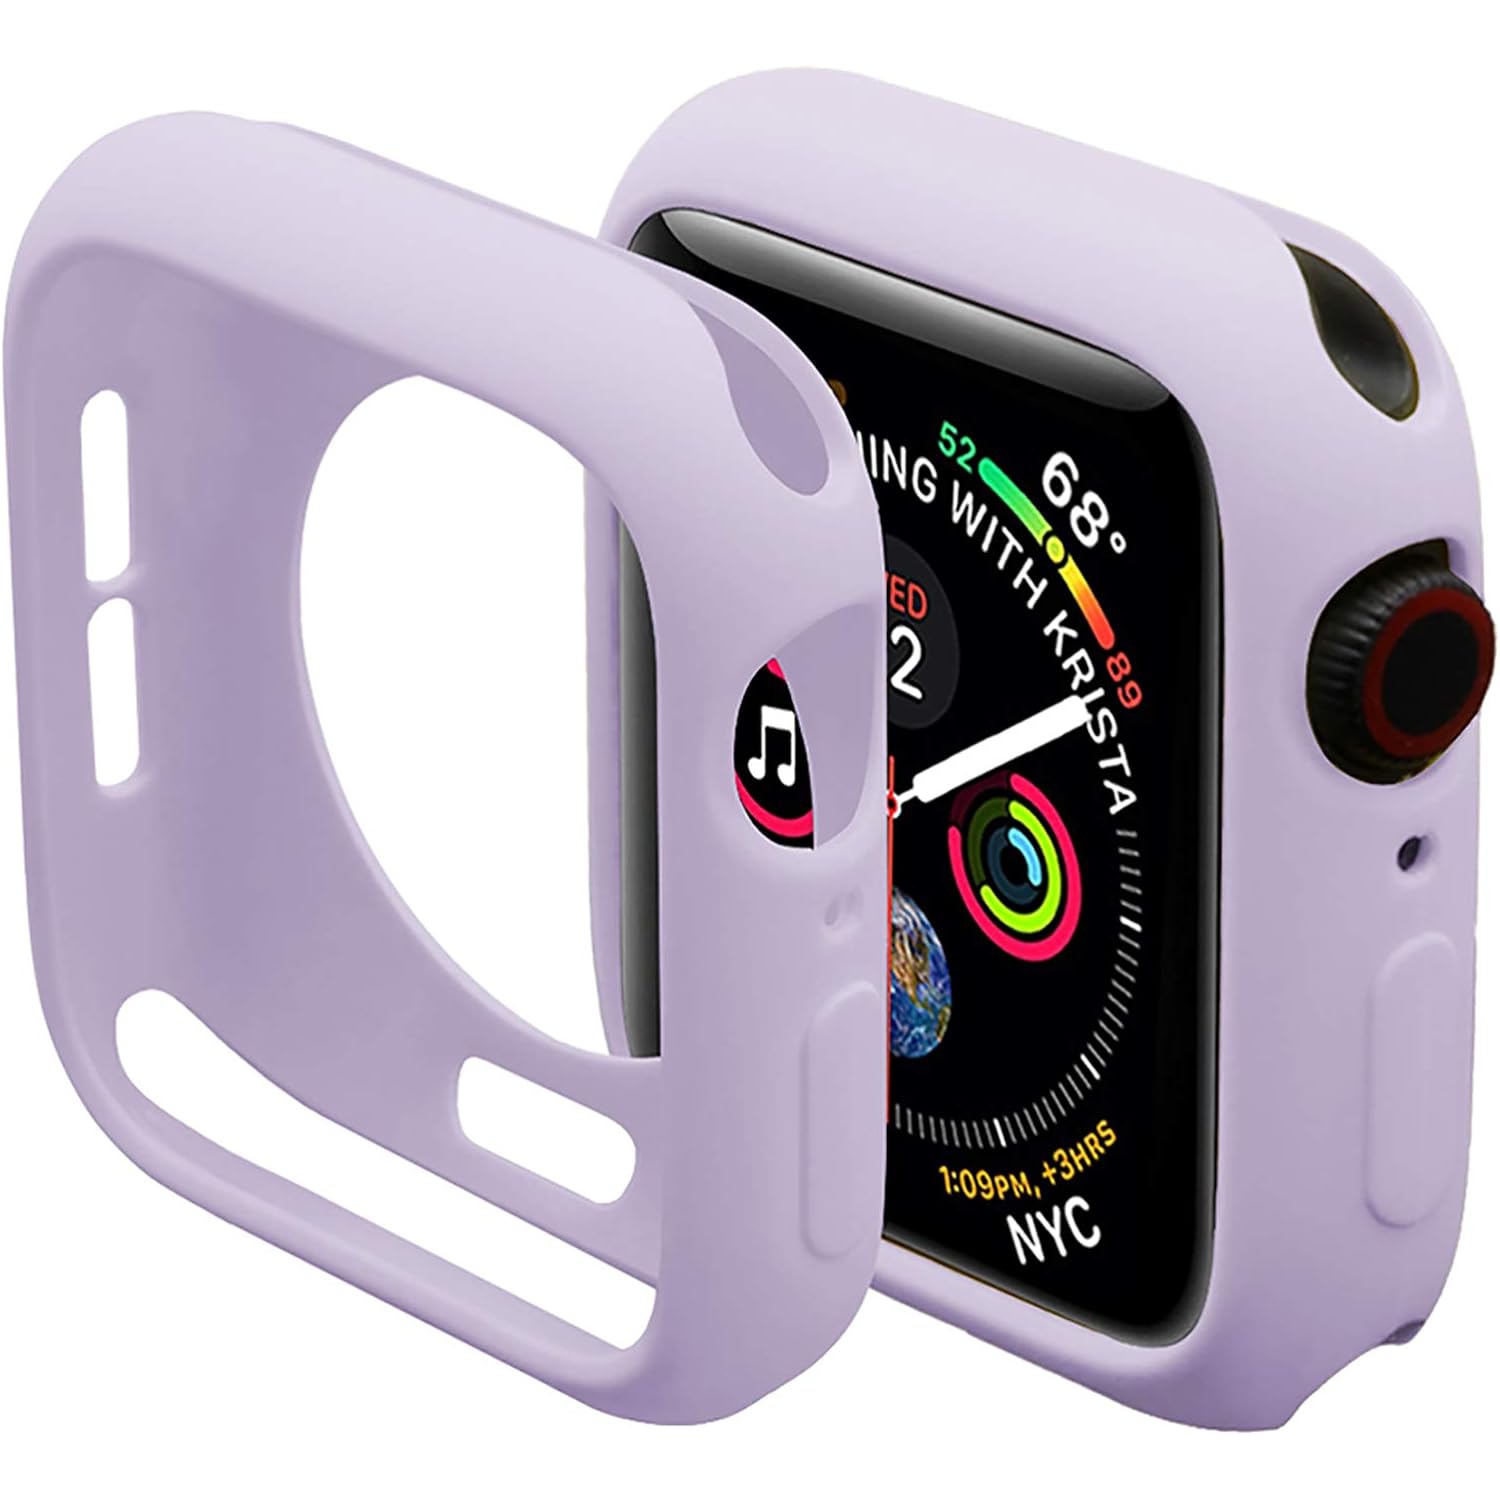 Compatible Apple Watch 42mm Case Series 2 & 3 Cover Case, Ultra-Thin Protective iwatch Bumper Cover Case